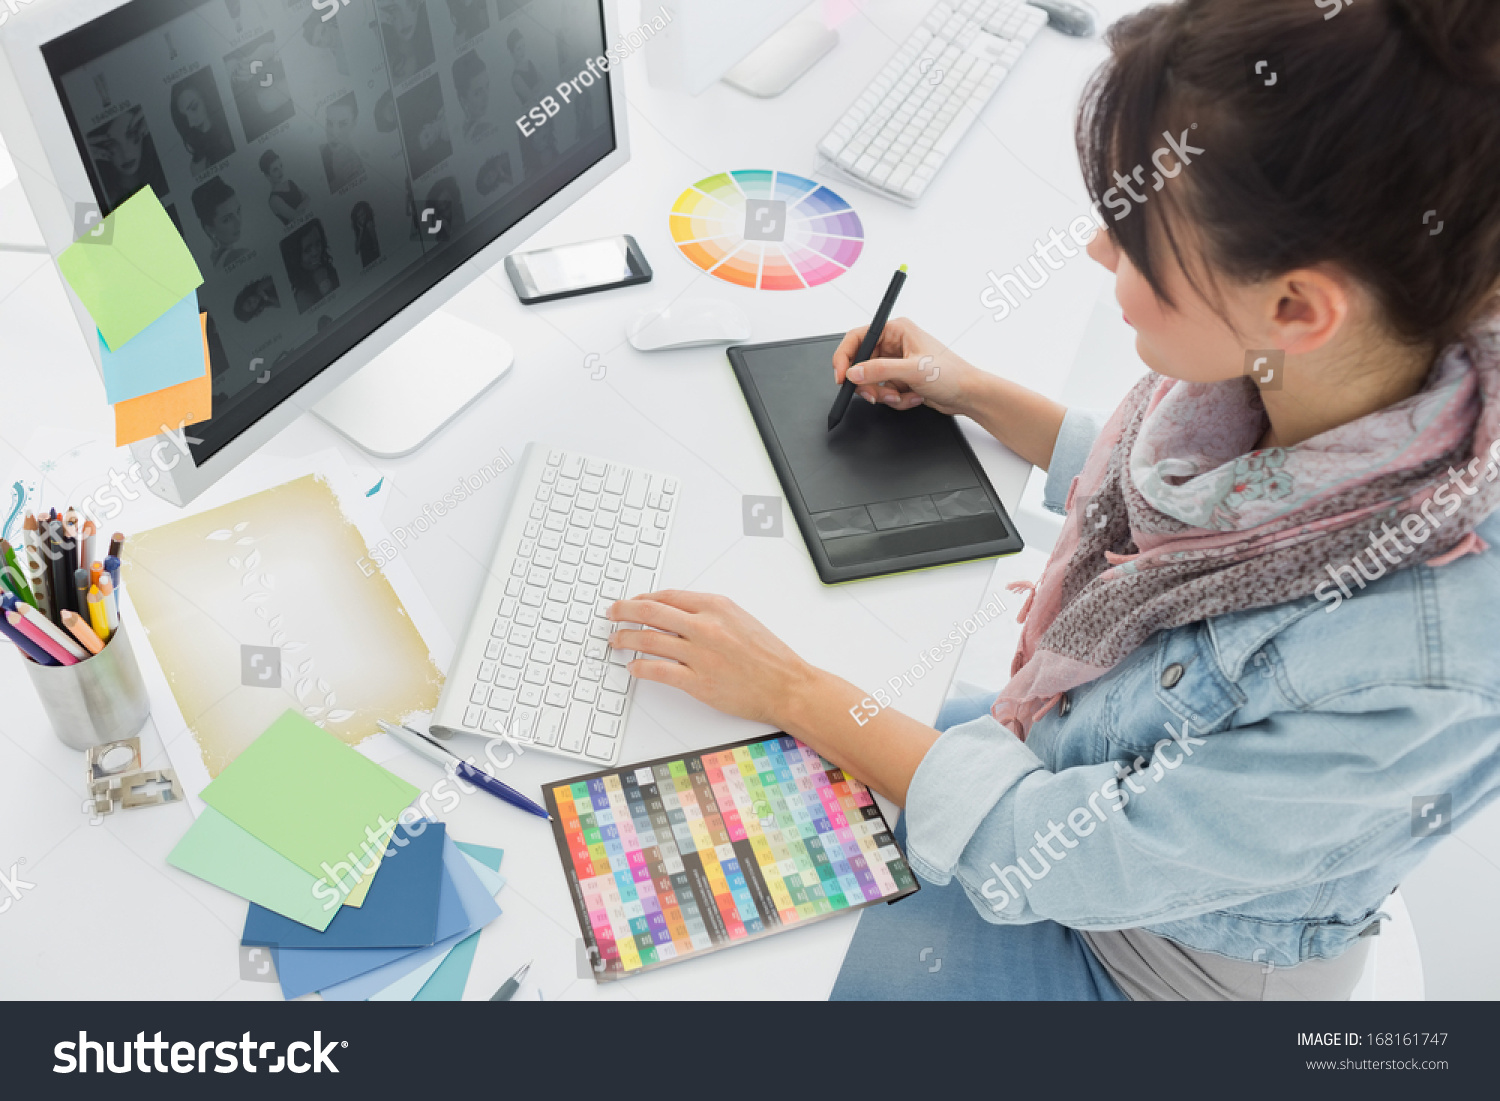 High angle view of an artist drawing something on graphic tablet at the office #168161747